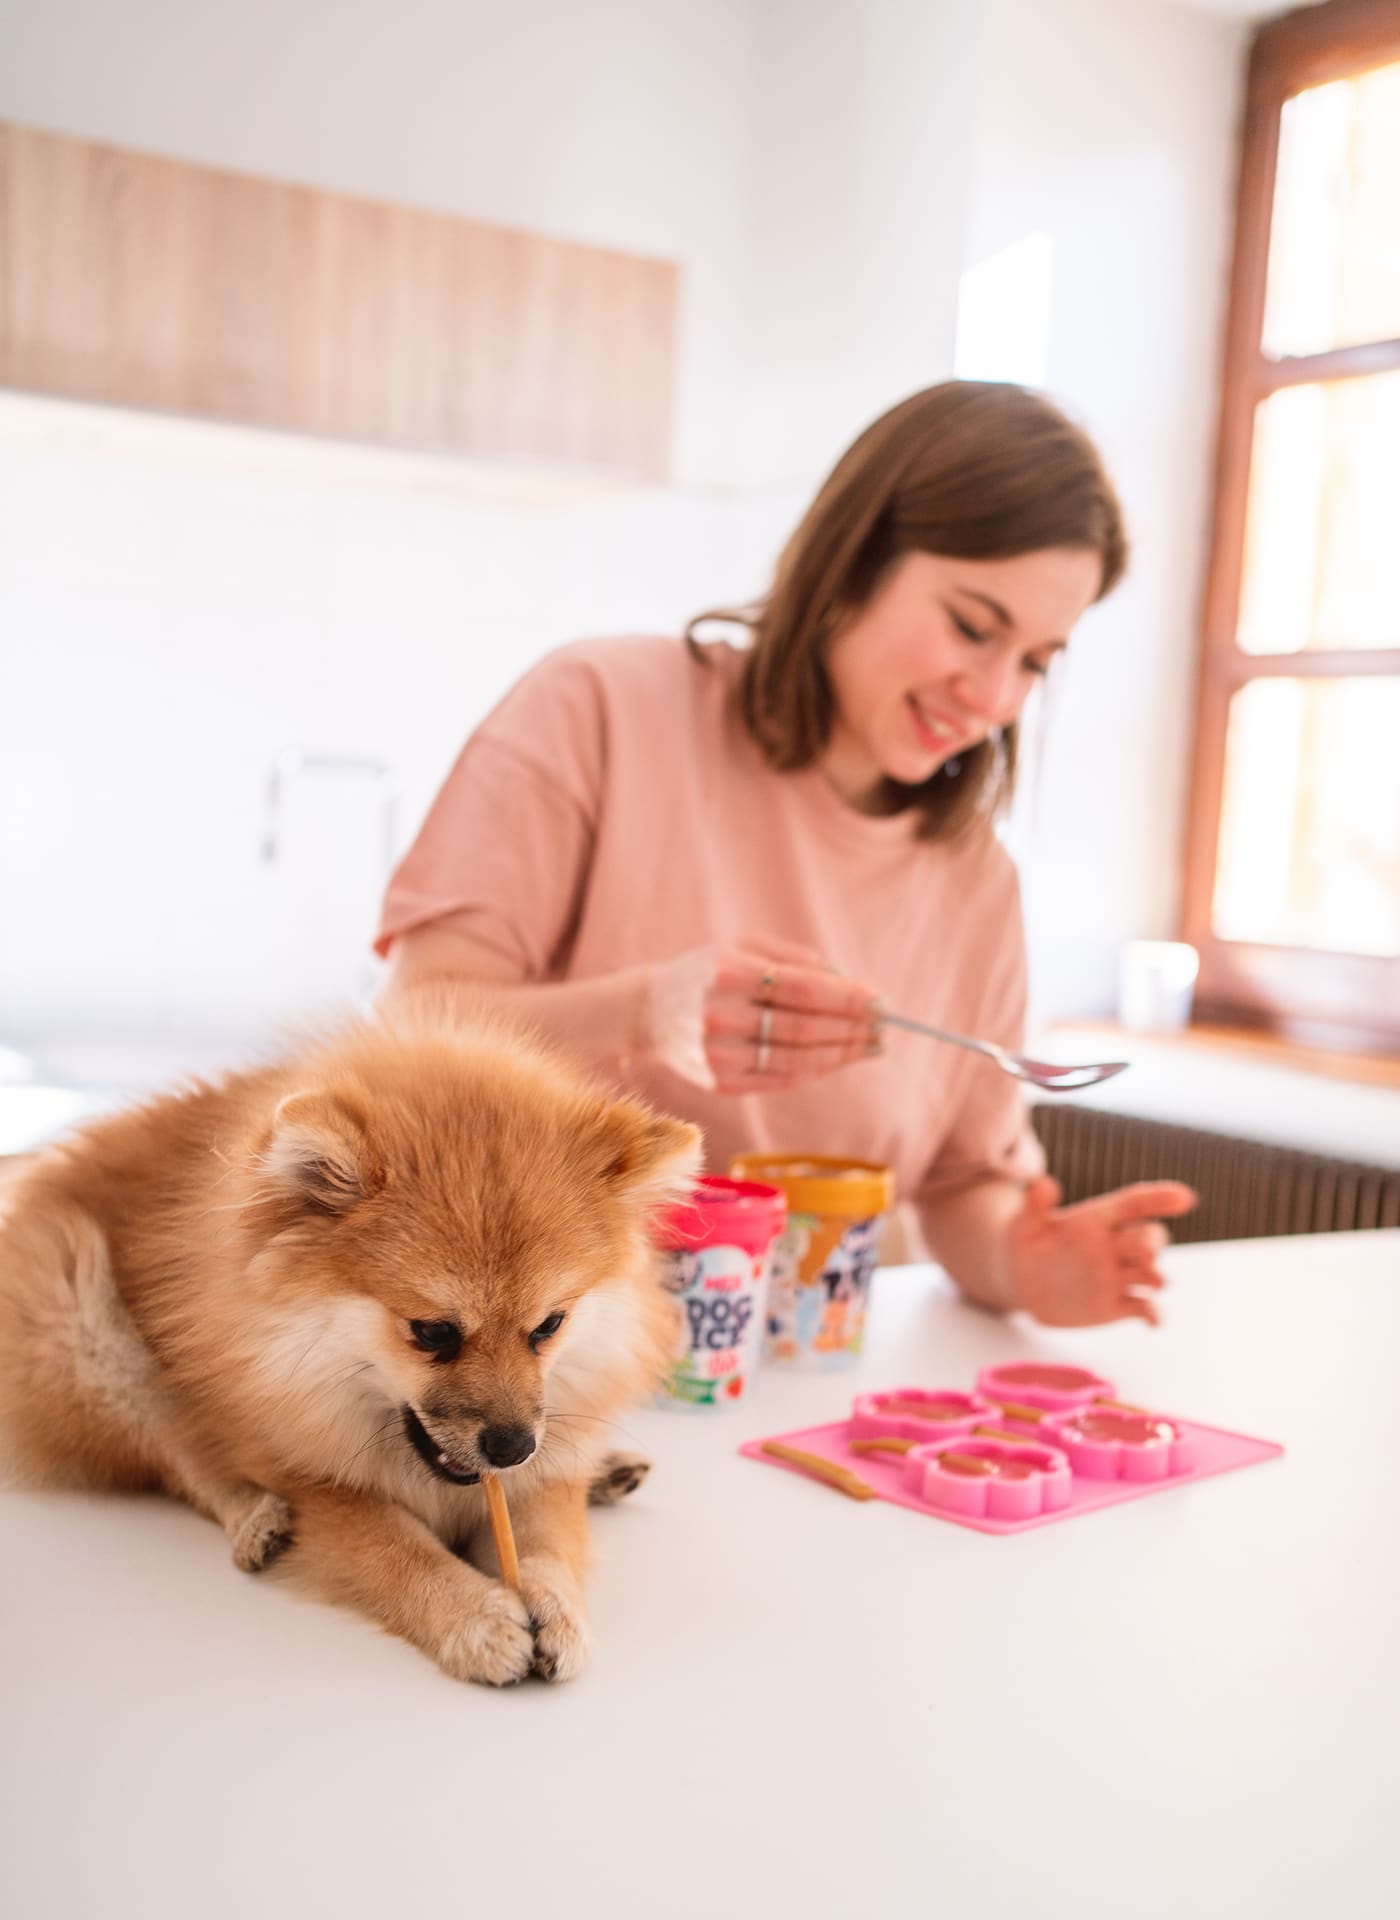 Girl and pomeranian making Smoofl ice cream for dogs